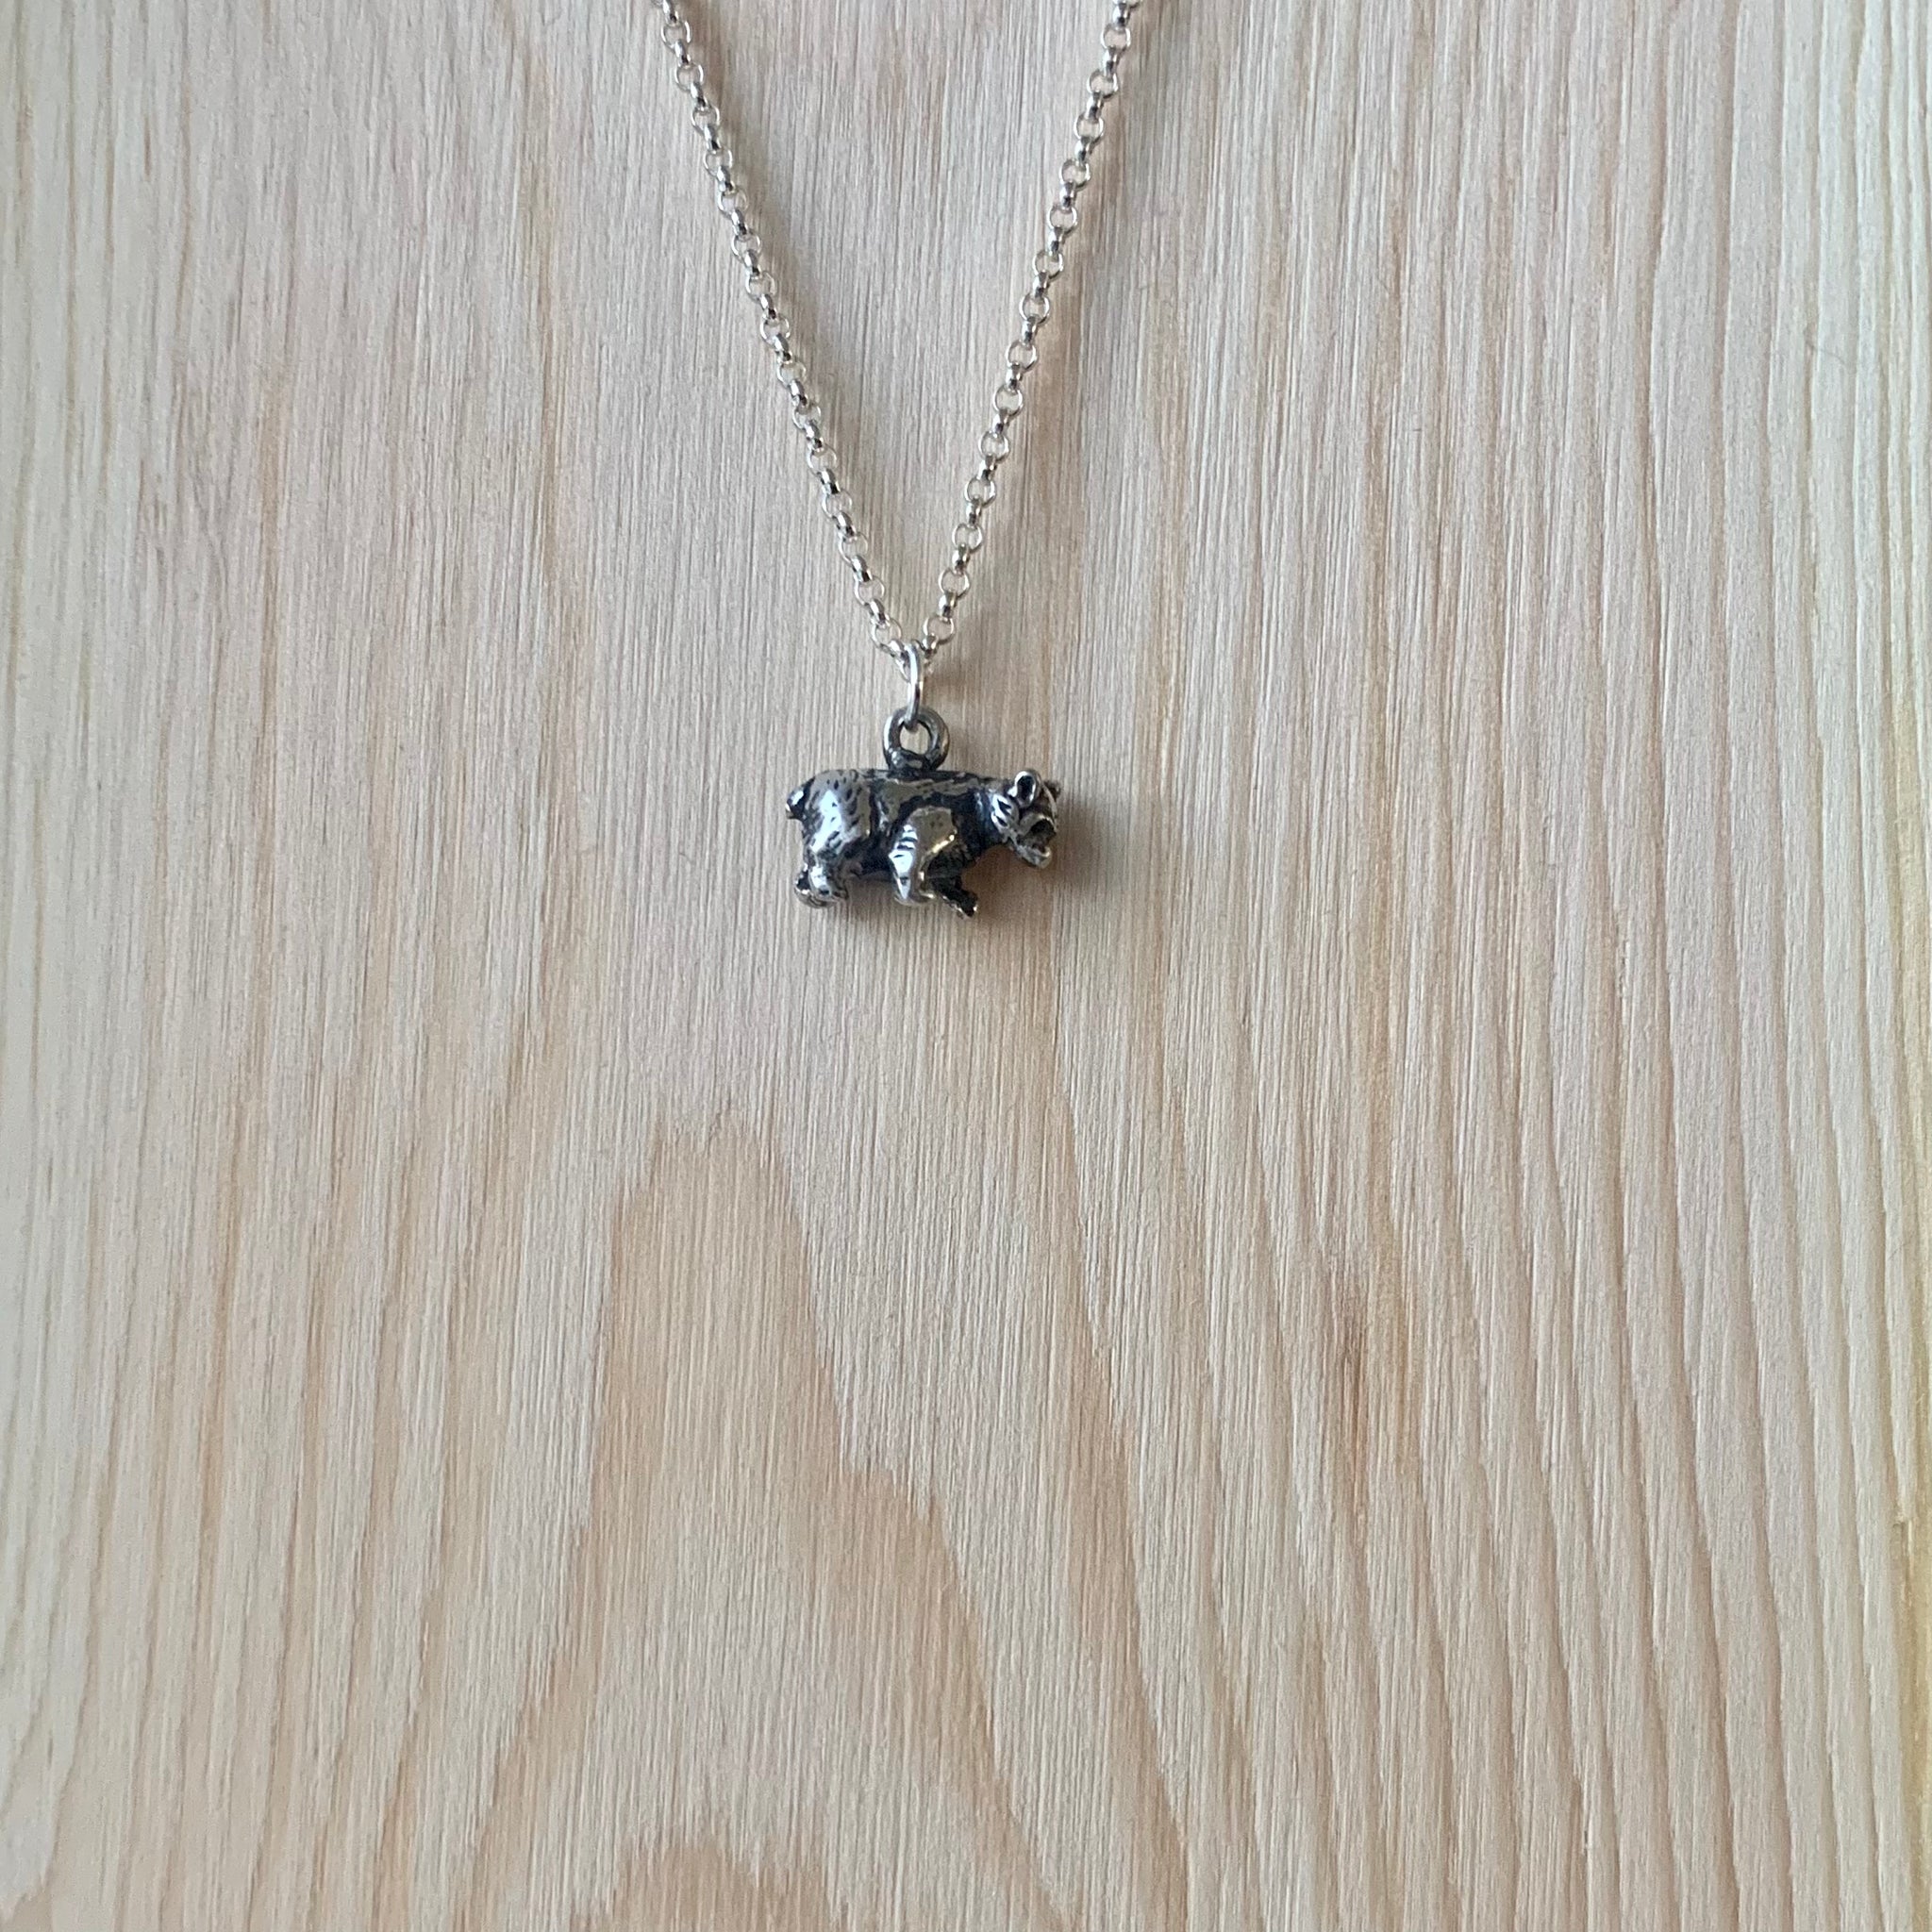 Unmarked Industries Bear Cub Necklace